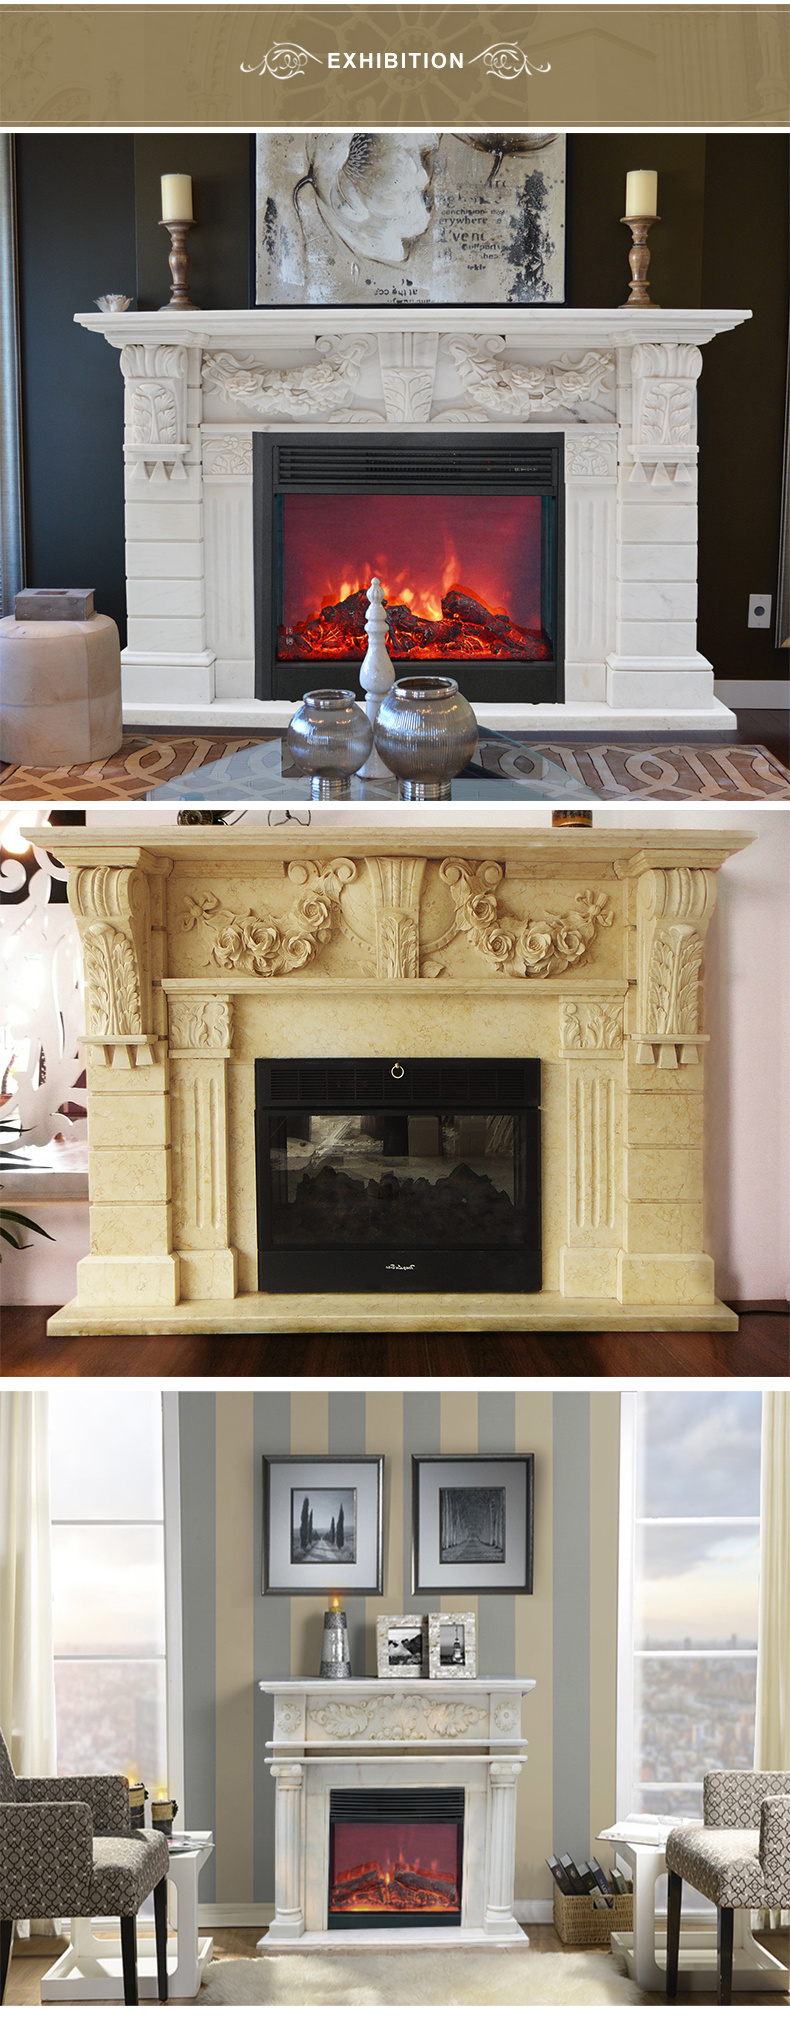 Western Vintage Stone Mantel Marble Freestanding Fireplace for Sale